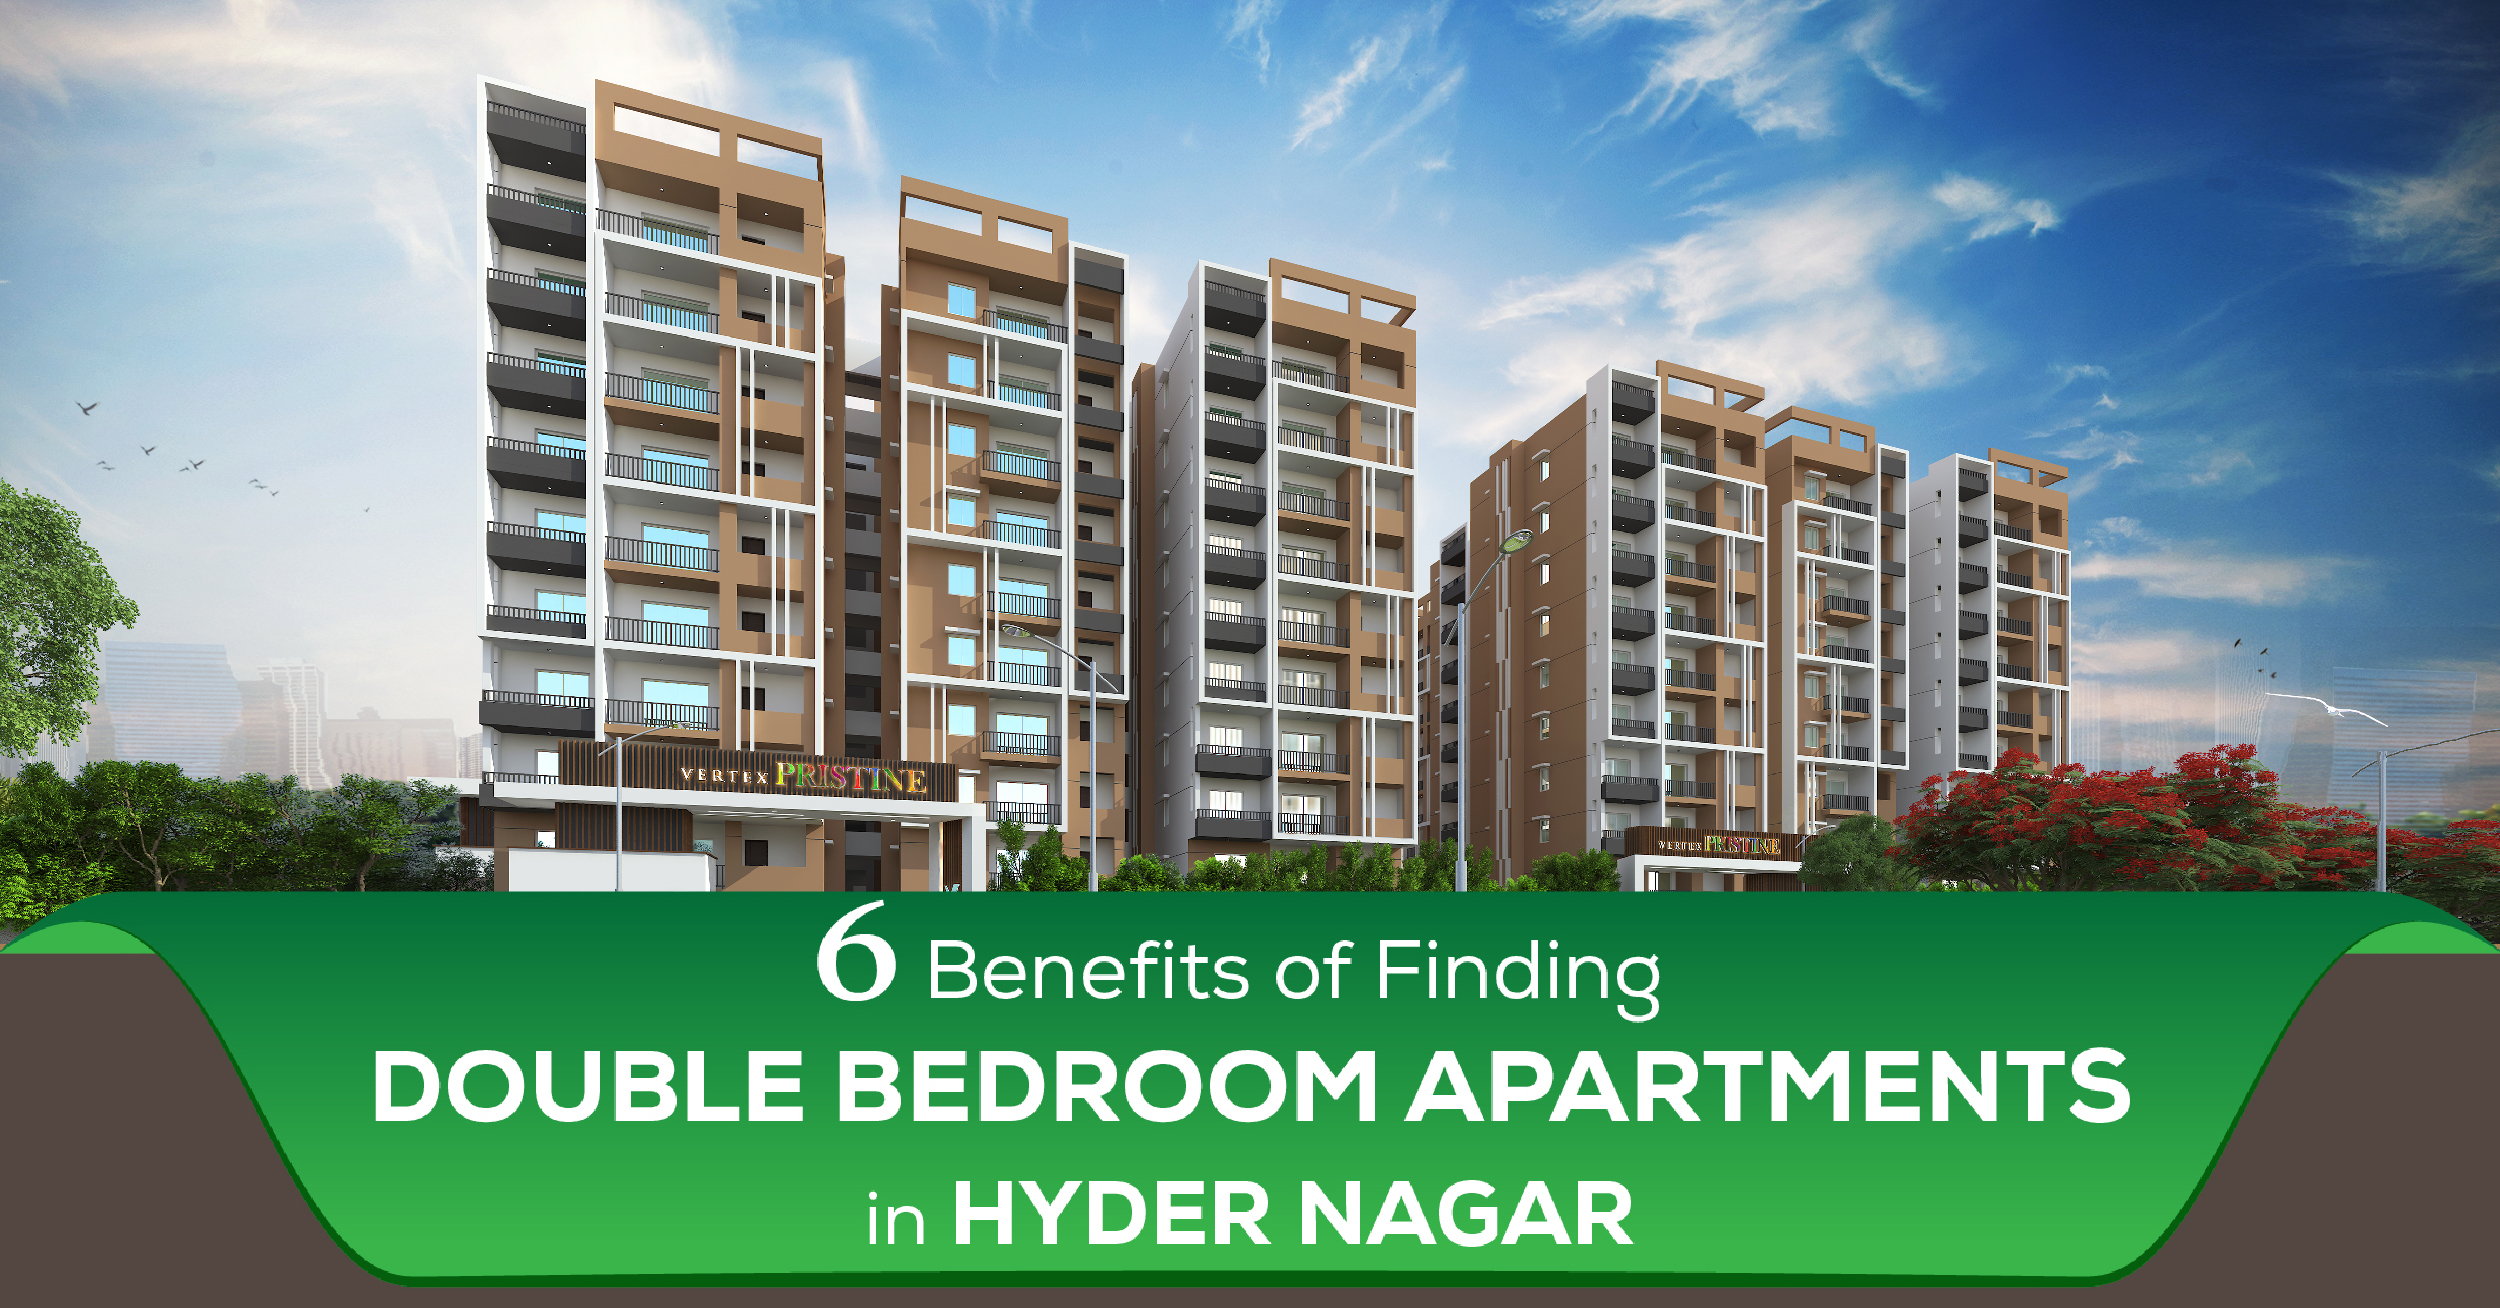 6 Benefits of Finding Double Bedroom Apartments in Hyder Nagar